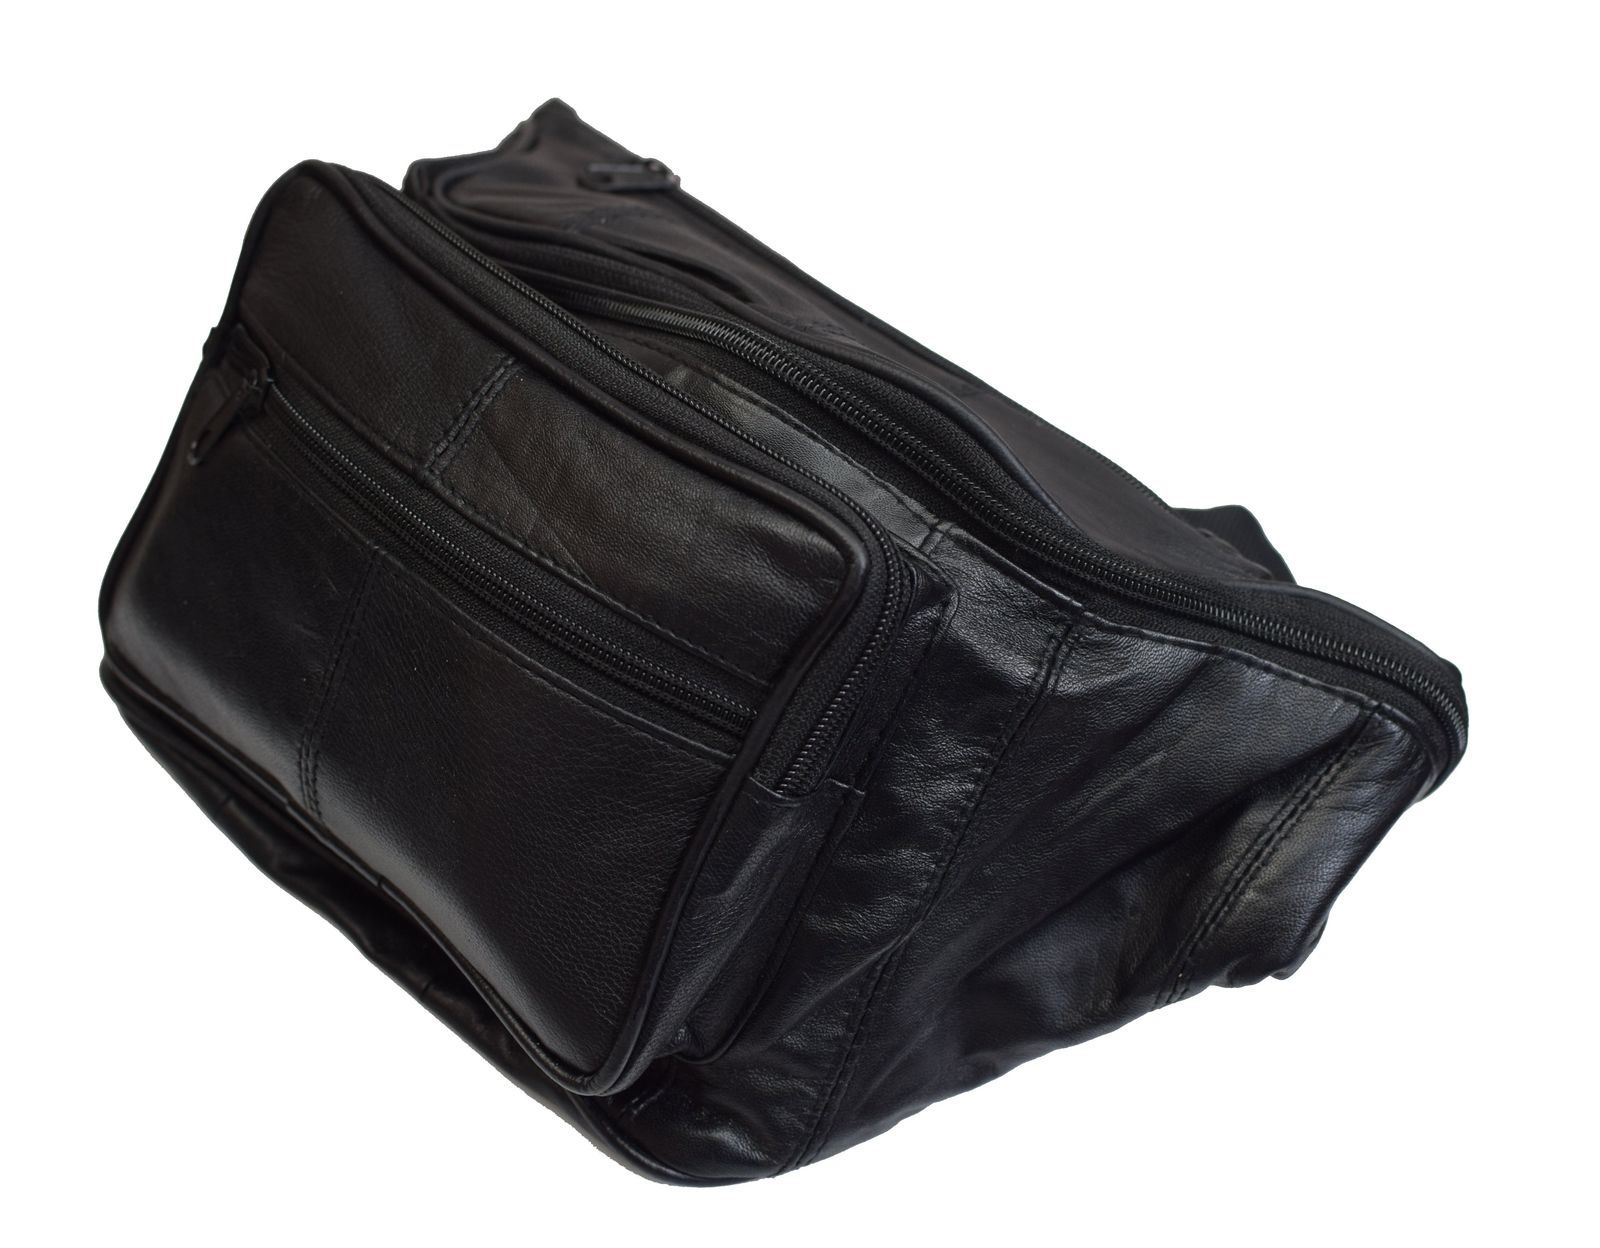 Genuine Leather Concealed Carry Weapon Waist Gun Pouch Fanny Pack Men & Women | eBay